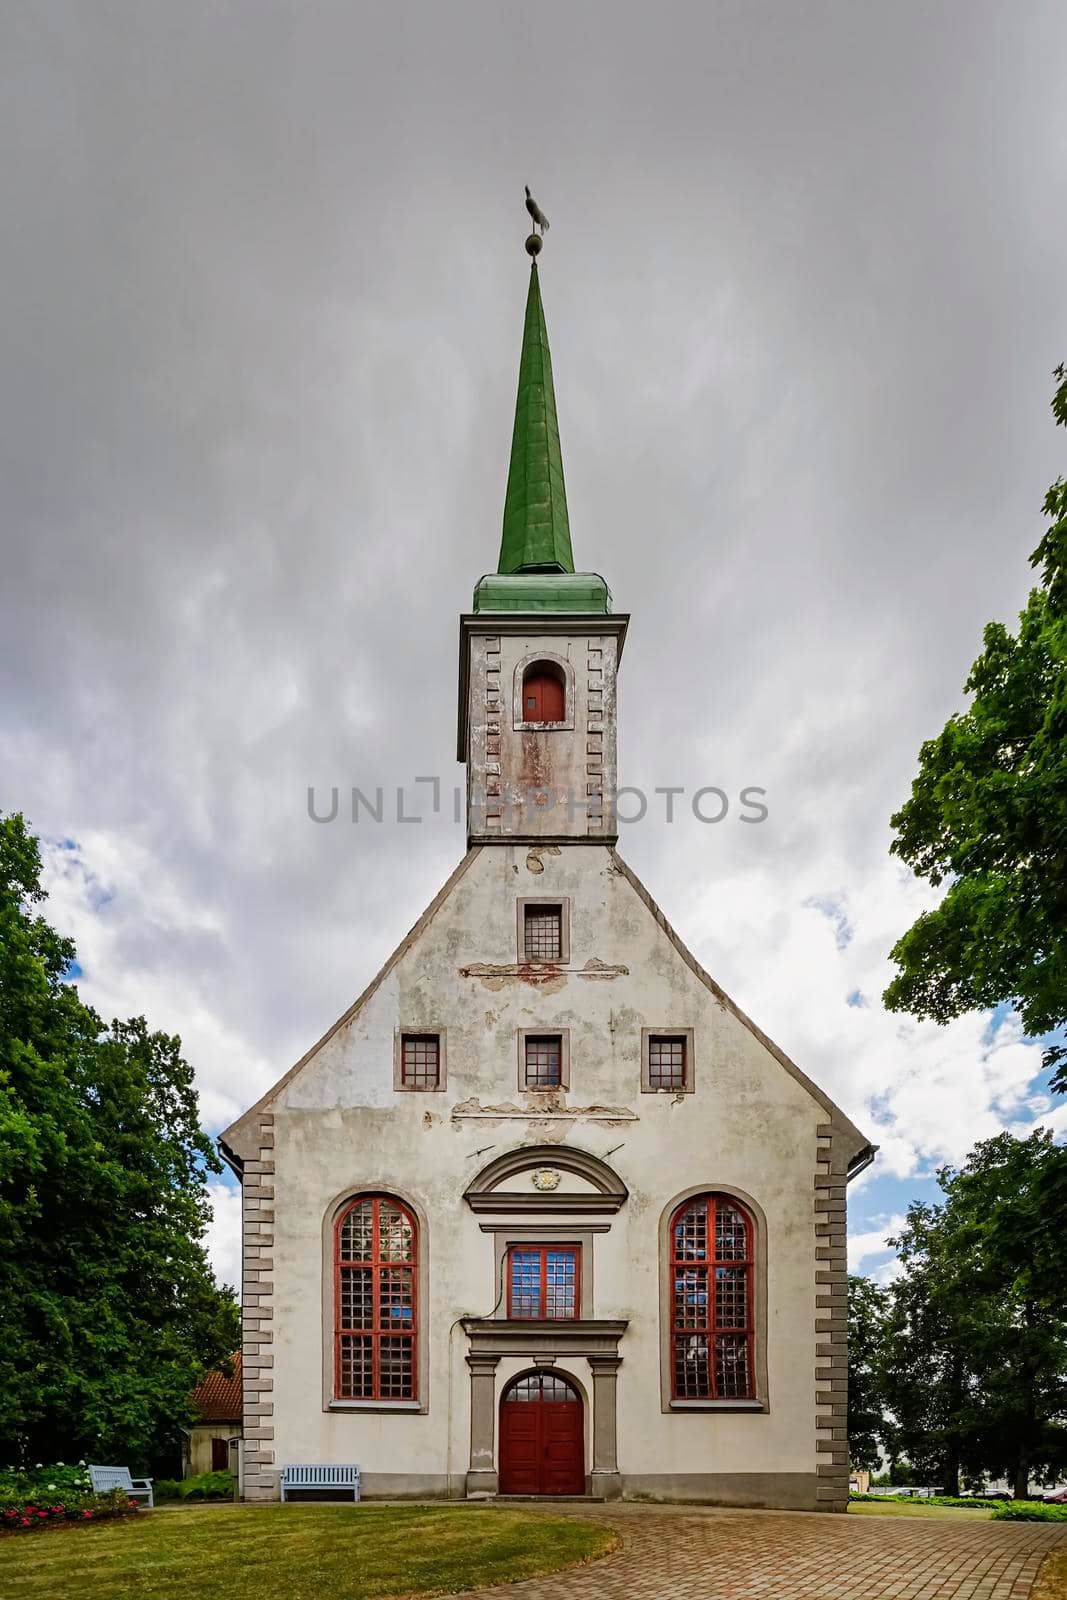 An old church in Latvia by SNR